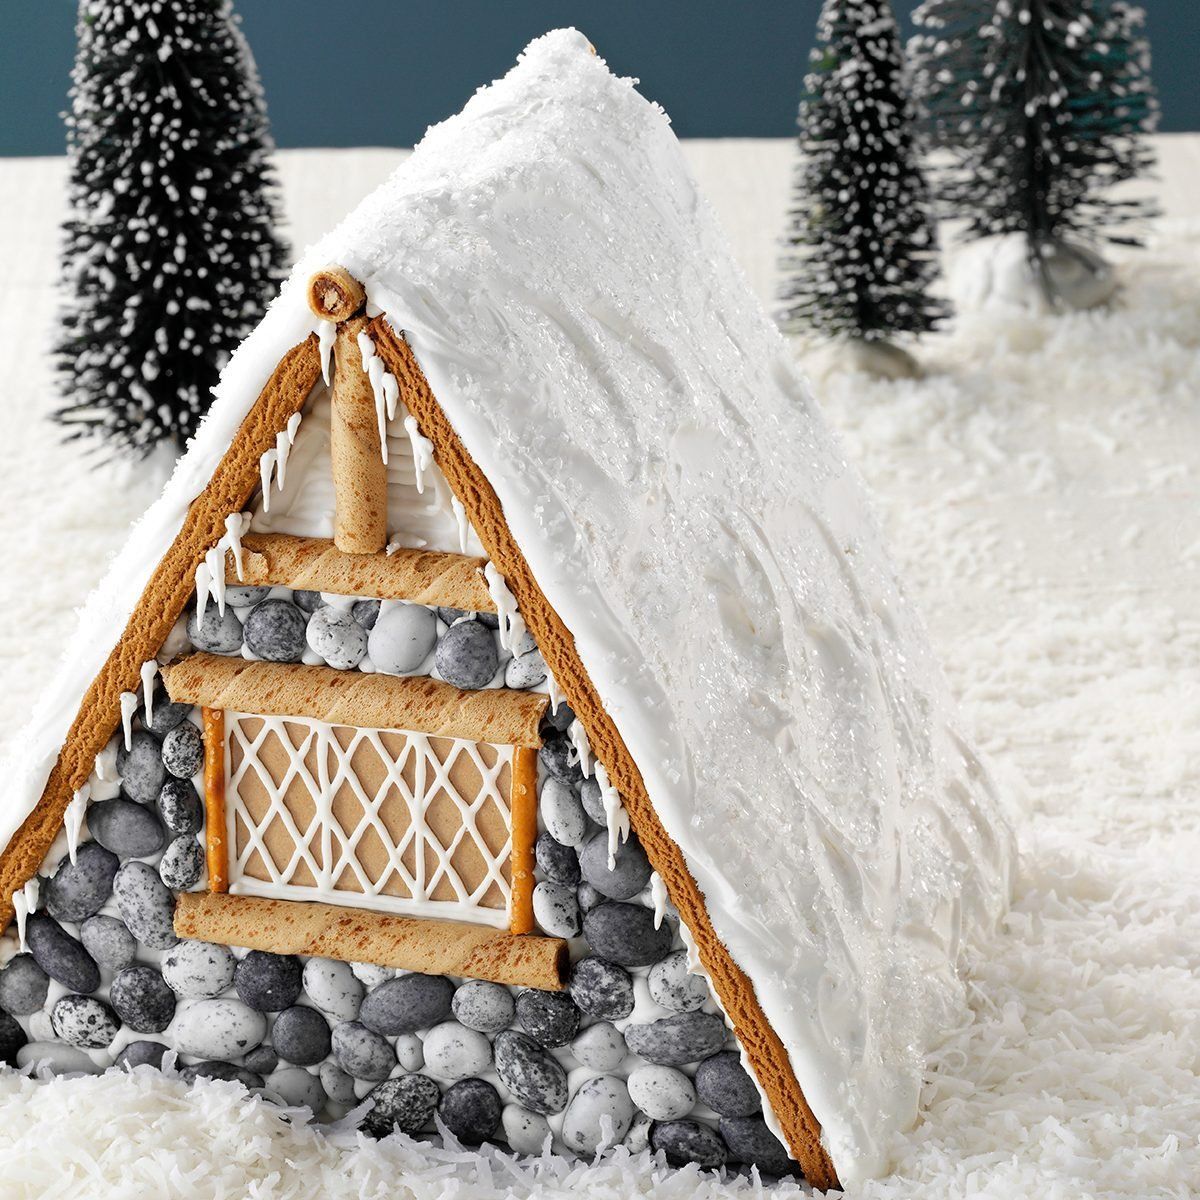 20 Must-See Gingerbread House Ideas -   16 gingerbread house designs ideas